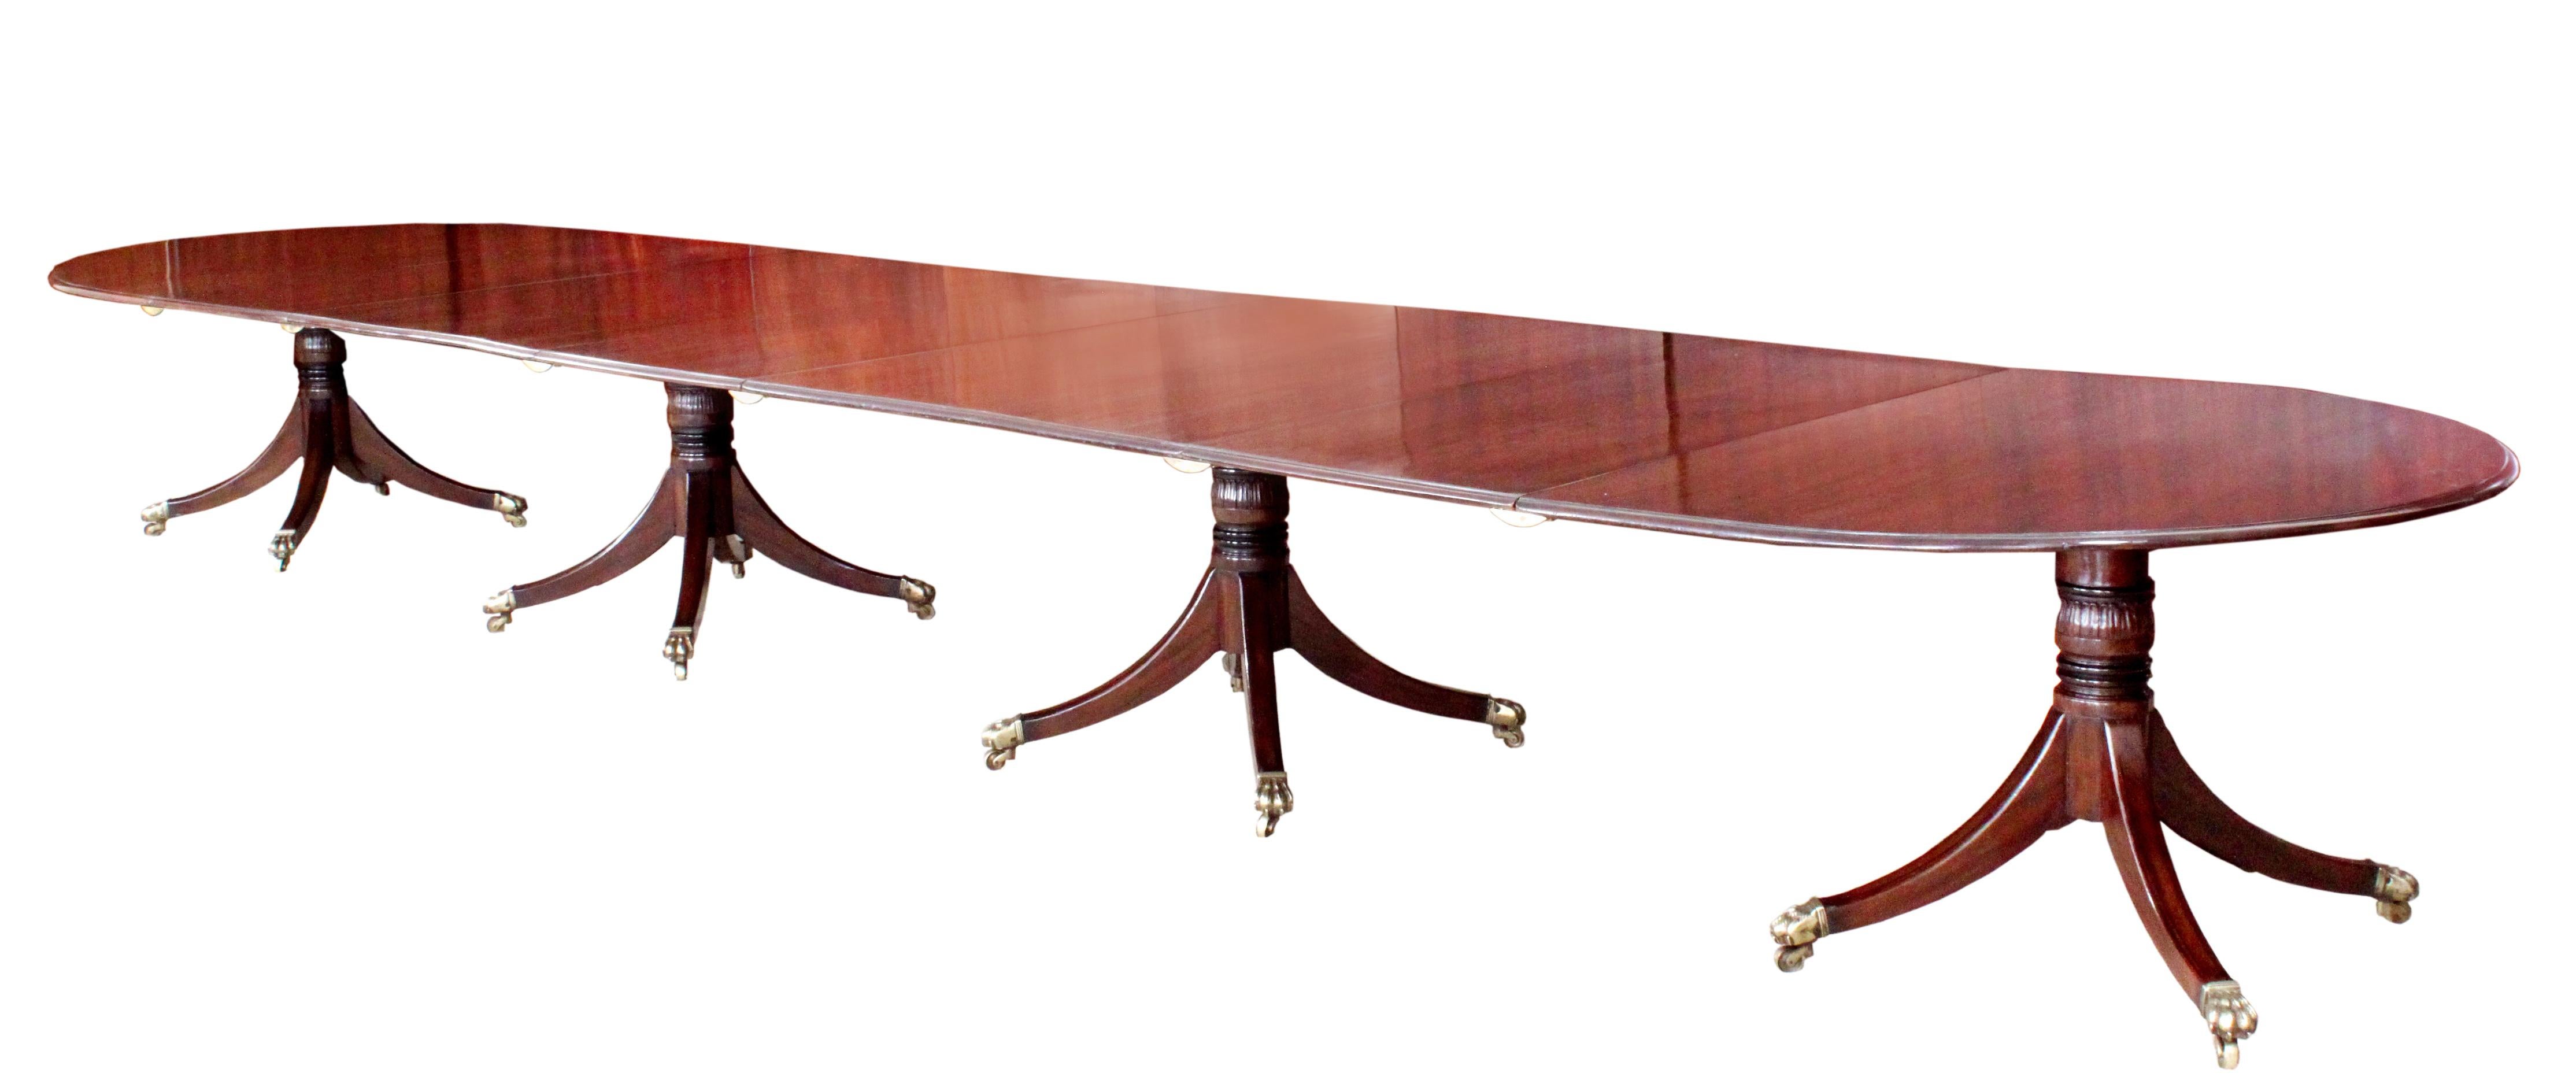 A good George III four-pedestal dining table; all four pedestals, blocks, bearers and their tops are original; the three loose leaves replaced in well matched Georgian timber. The attractive four splay bases with finely carved stems, ebonized